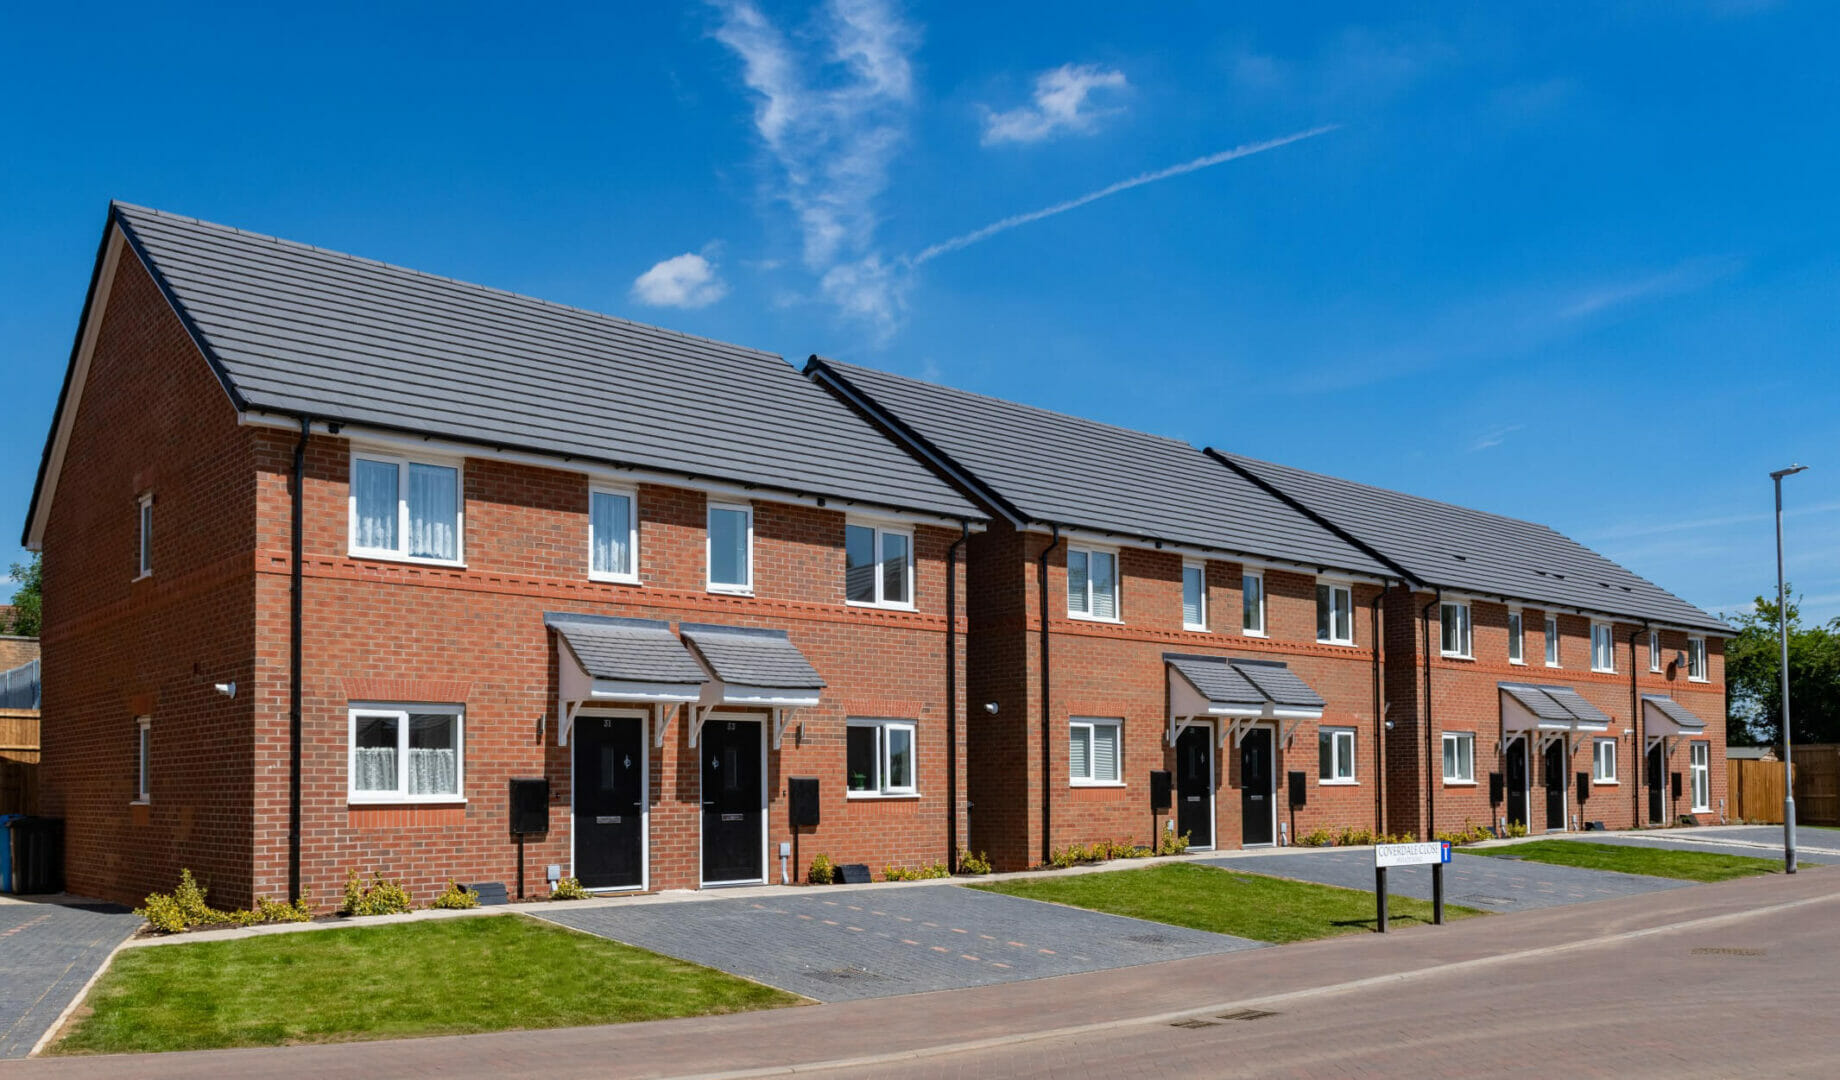 GRAMPIAN USED ON SOCIAL HOUSING PROJECT IN CORBY